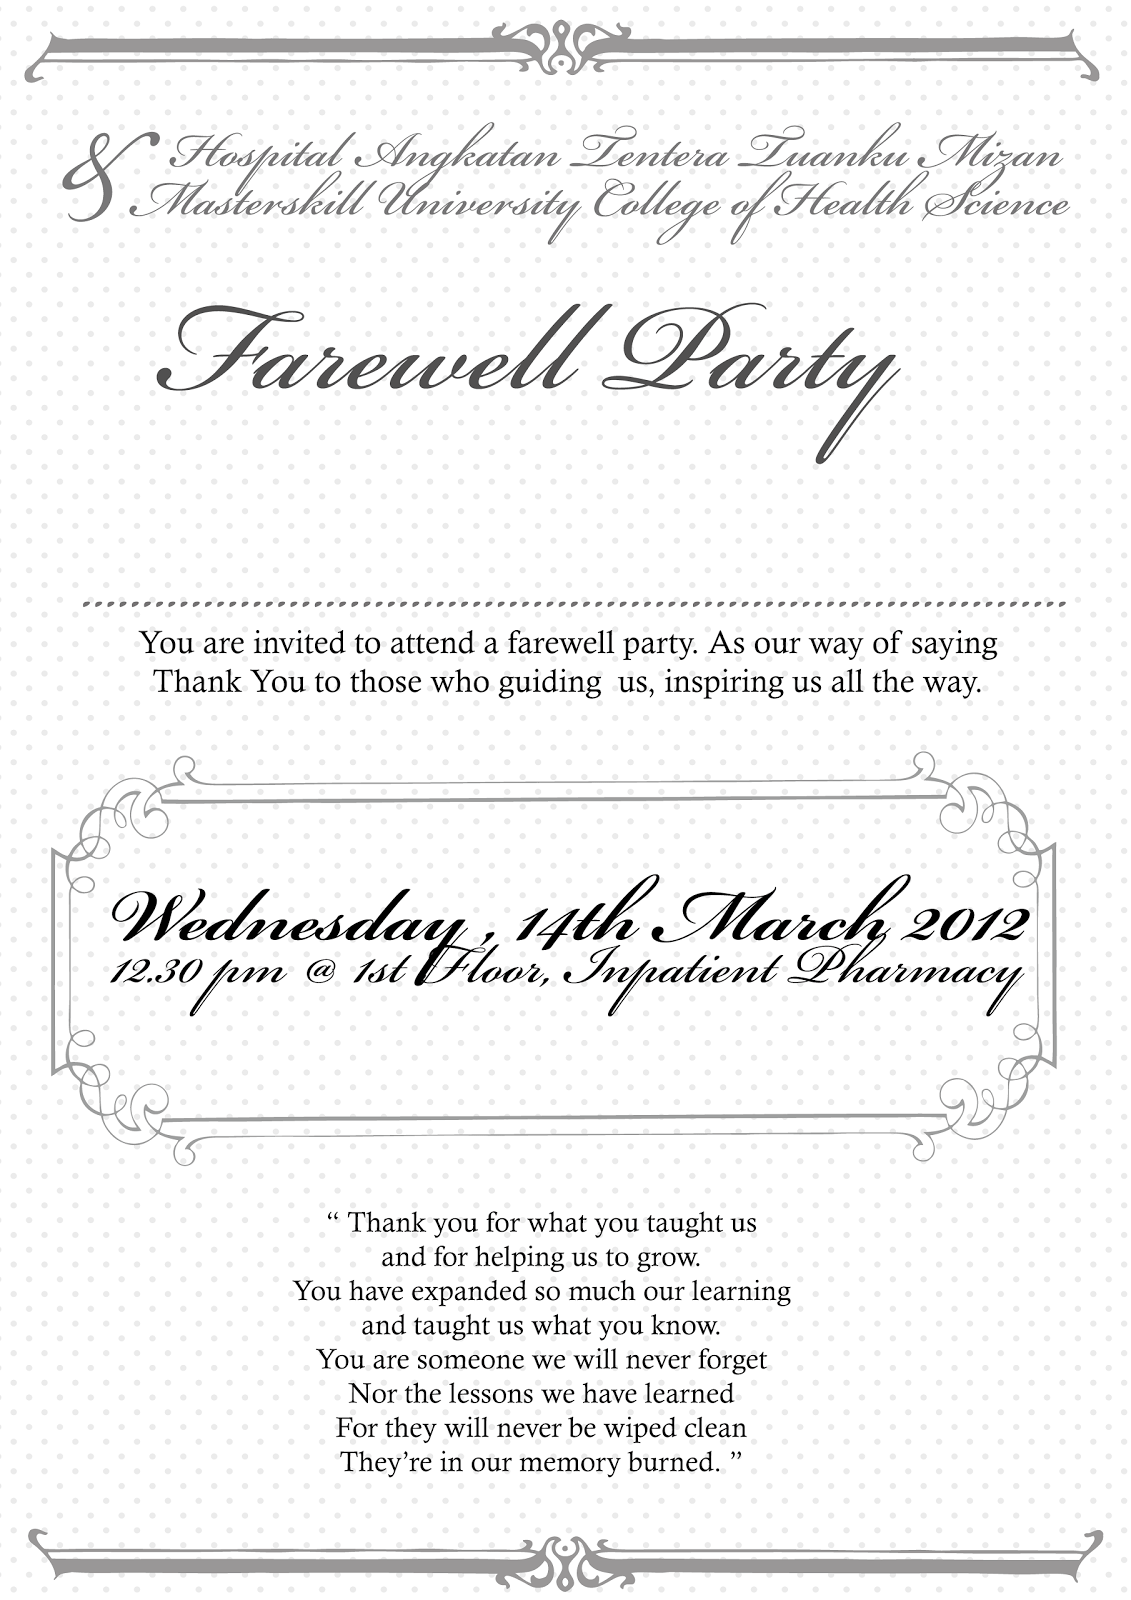 Farewell Party Invitation Email - Mickey Mouse Invitations Templates